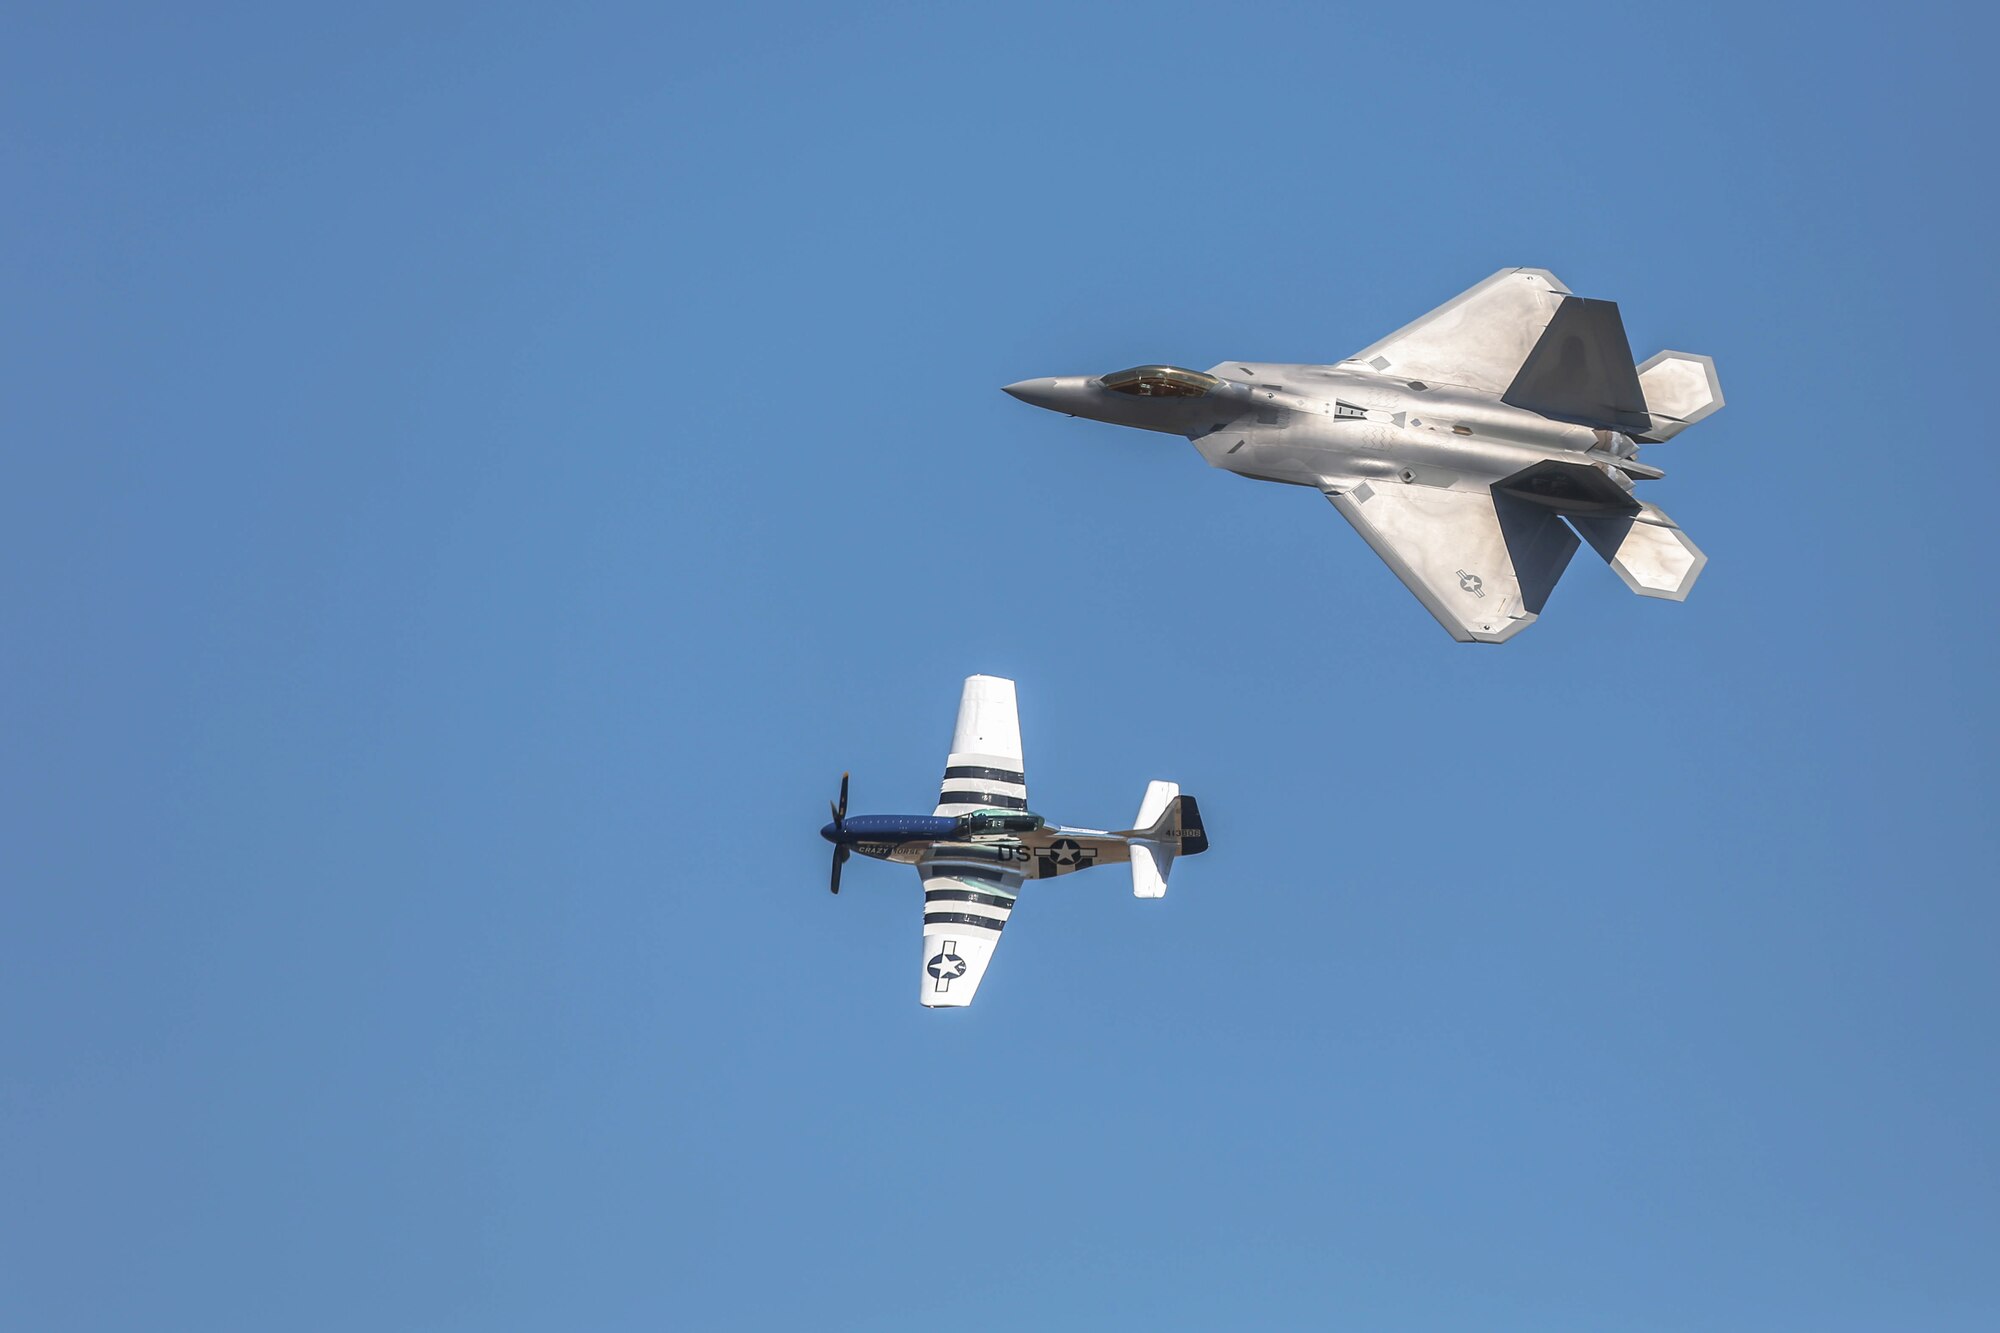 Approximately 100,000 people turned out to Robins Air Force Base to witness the 2012 Air Show. An aerial demonstration called the Heritage Flight mixed the old with the new -- a side-by-side flight by the F-22 Raptor and the P-51 Mustang. (U.S. Air Force photo by 1st Lt. Joel Cooke)